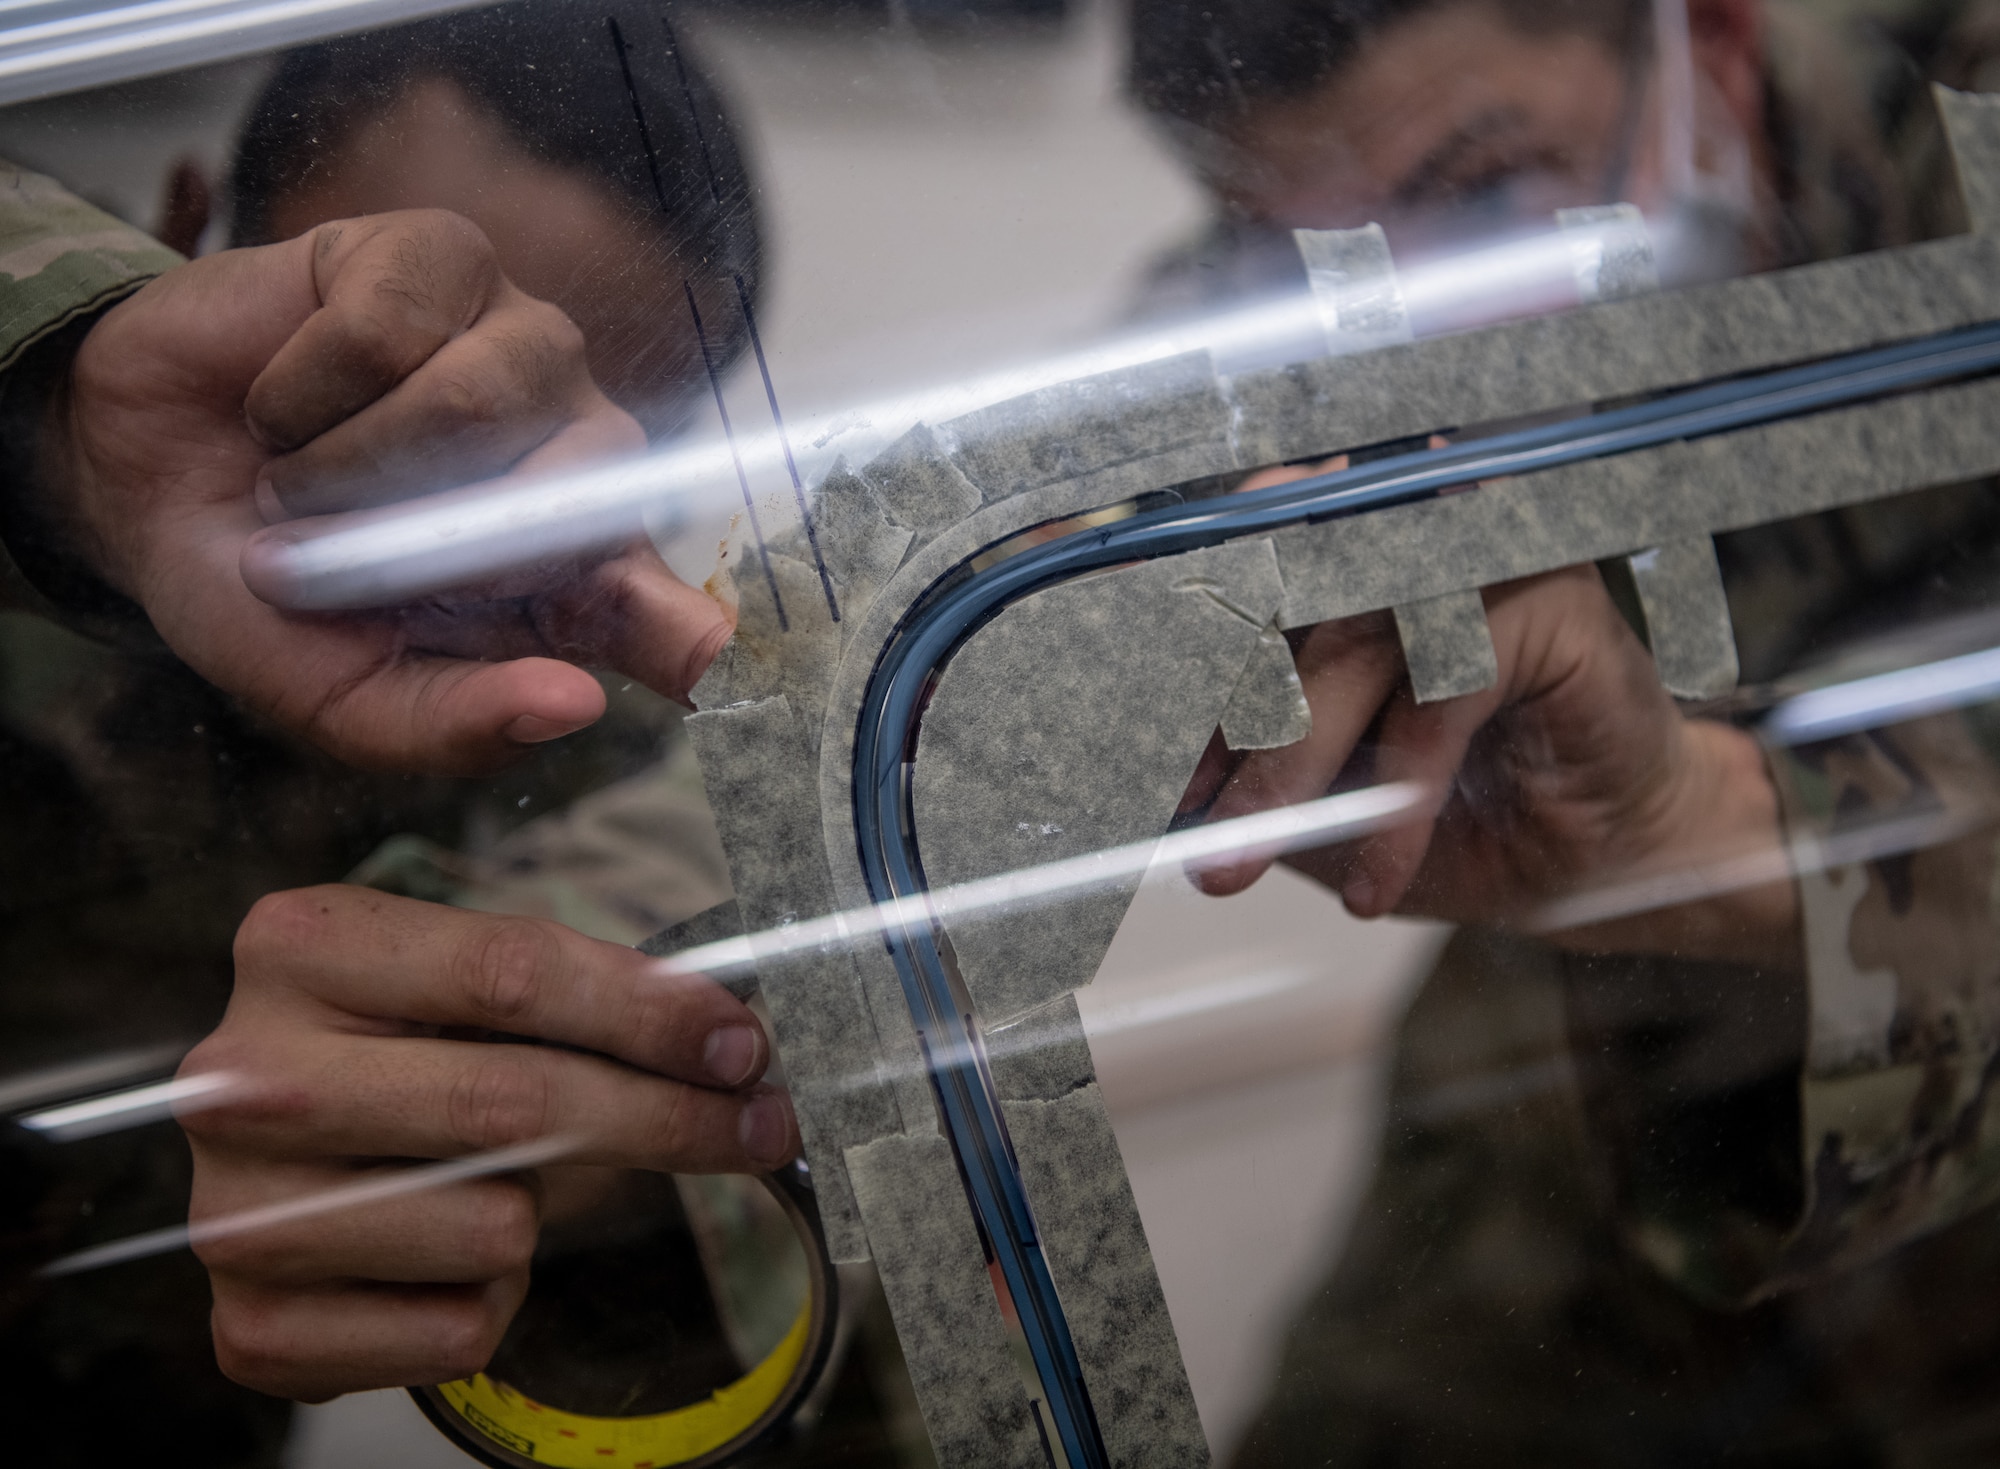 Senior Airman Matthew Romano, 56th Component Maintenance Squadron aircrew egress systems journeyman (left), trains Airman 1st Class Delwyn Travillion, 56th CMS aircrew egress systems apprentice, on the installation of flexible linear shaped charge (FLSC) on a 3D-printed F-35A Lightning II canopy July 13, 2020, at Luke Air Force Base, Ariz. The 3D print of the F-35 canopy enables training on the installation of the FLSC without using operational resources. Installation of the FLSC is an essential task that requires zero errors. (U.S. Air Force photo by Airman 1st Class Dominic Tyler)